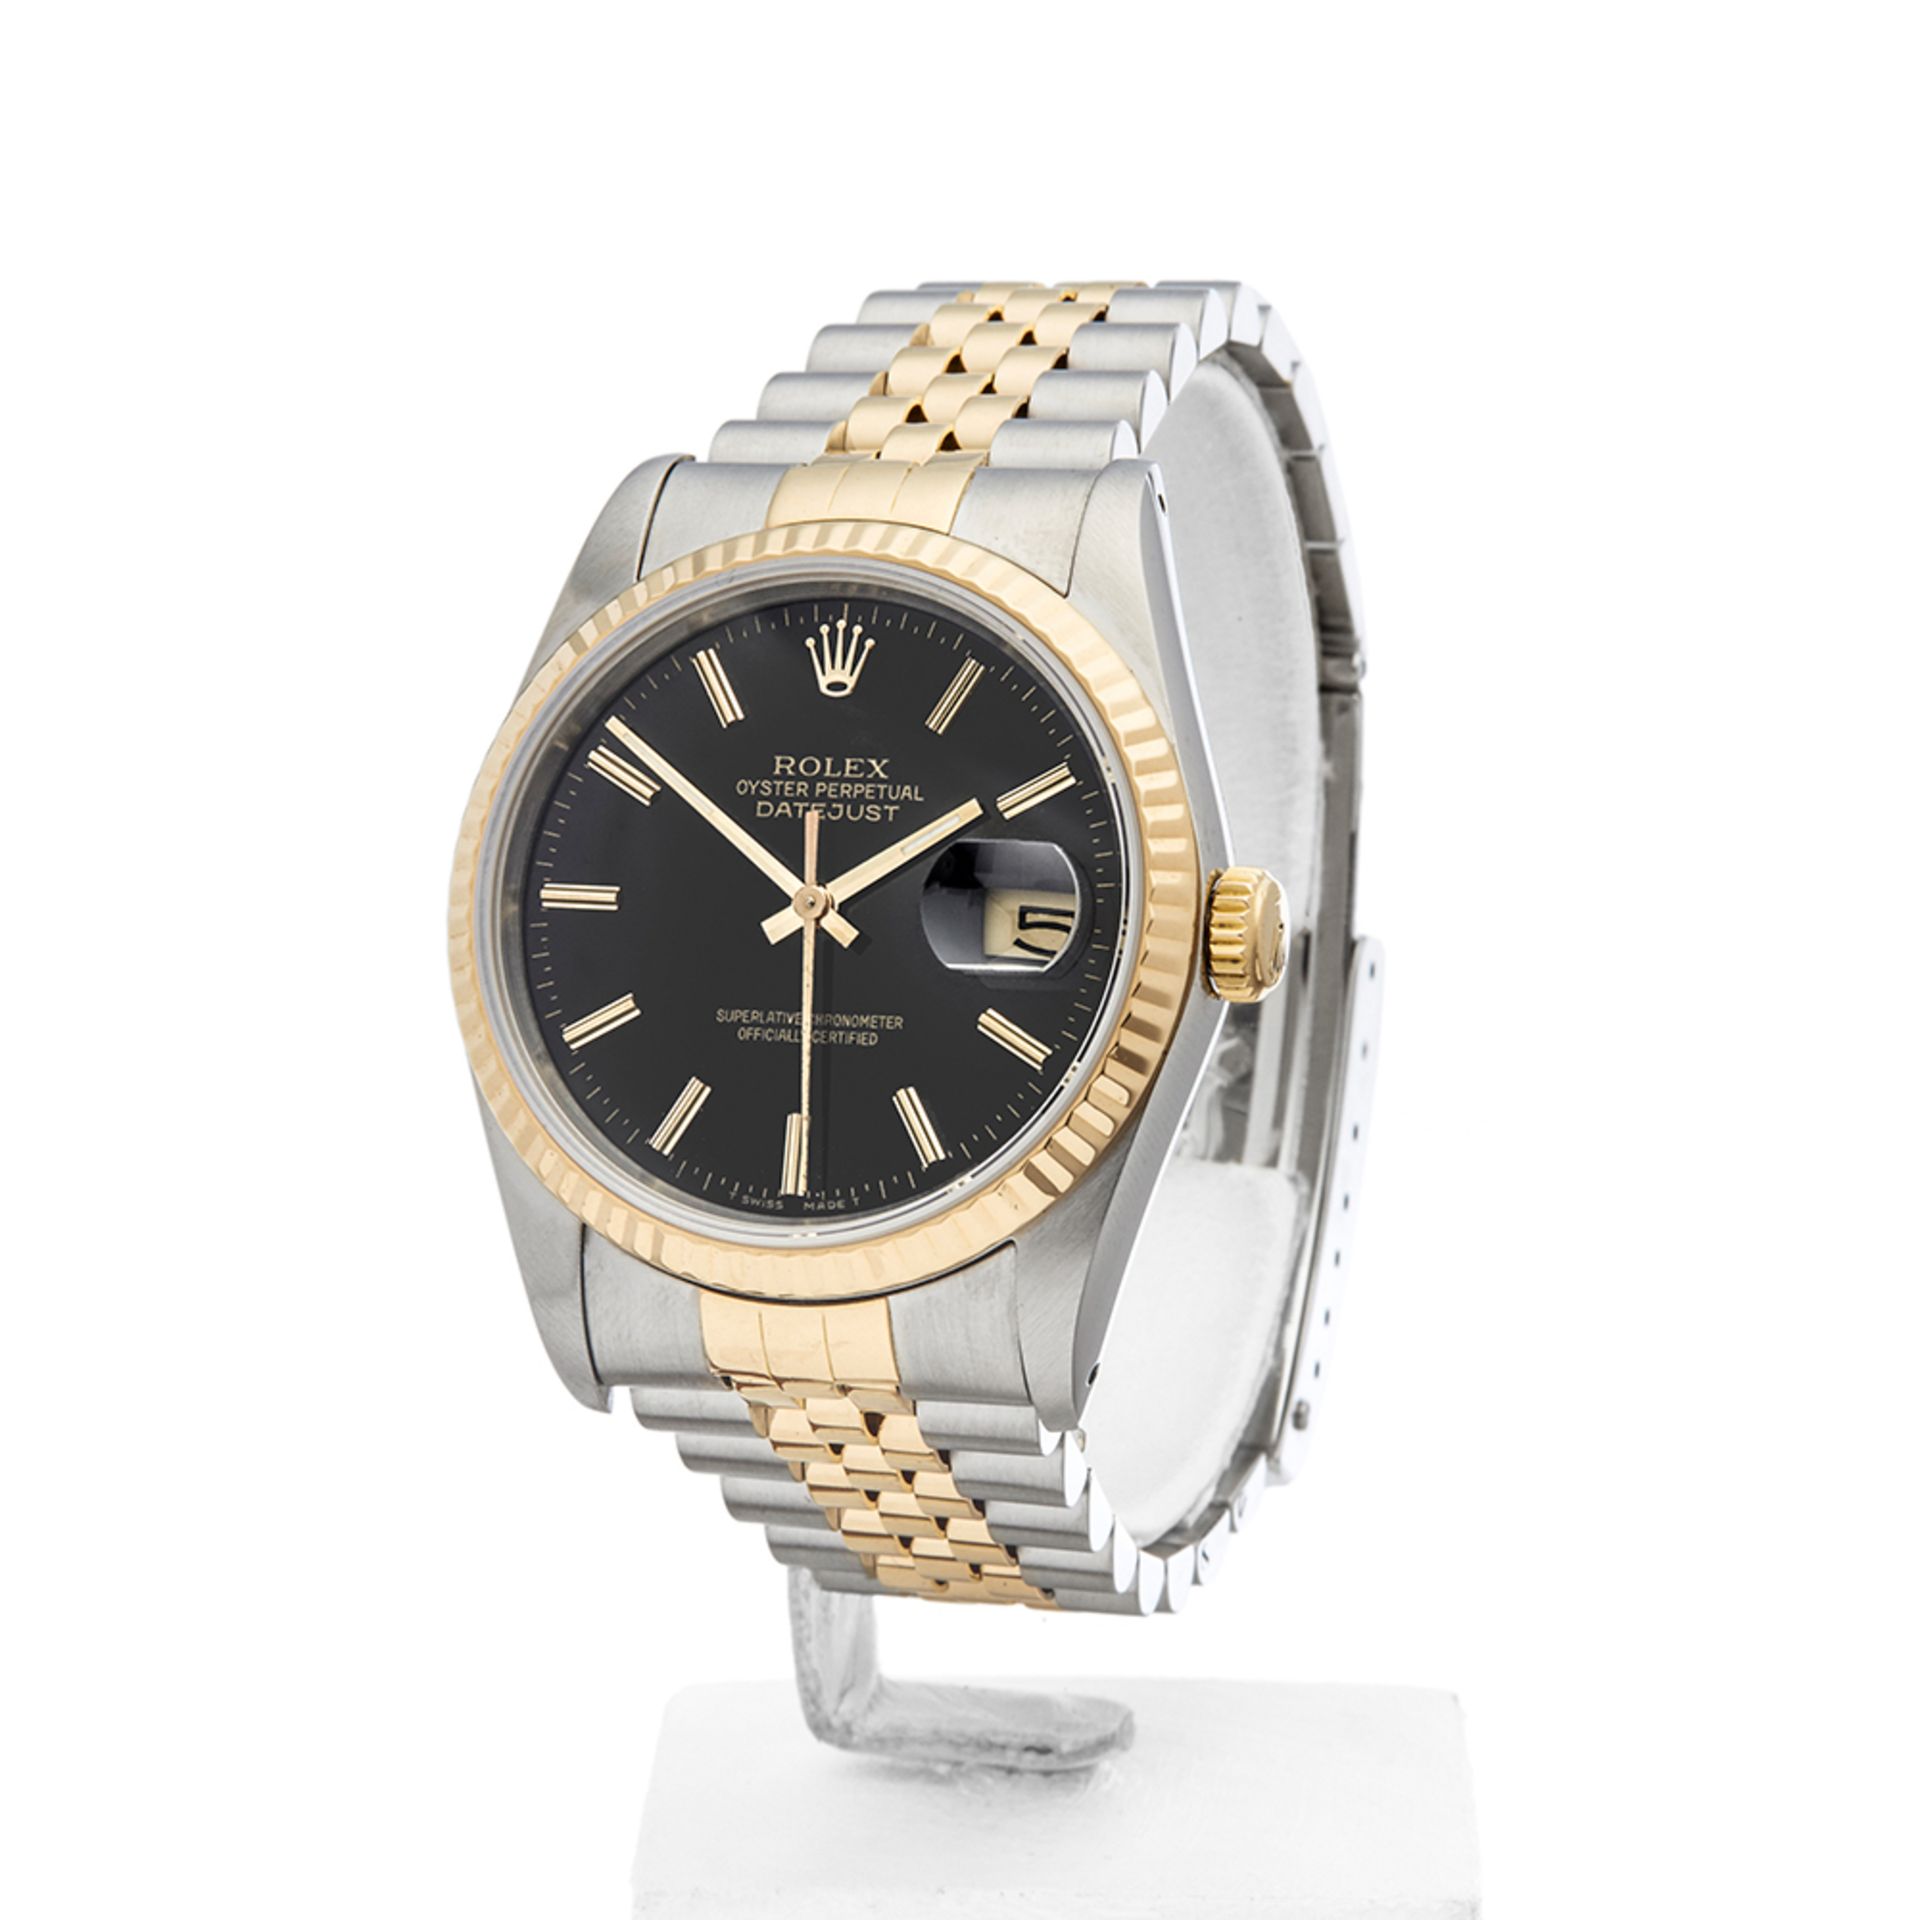 Rolex Datejust Stainless Steel & 18k Yellow Gold - 16233 - Image 3 of 9